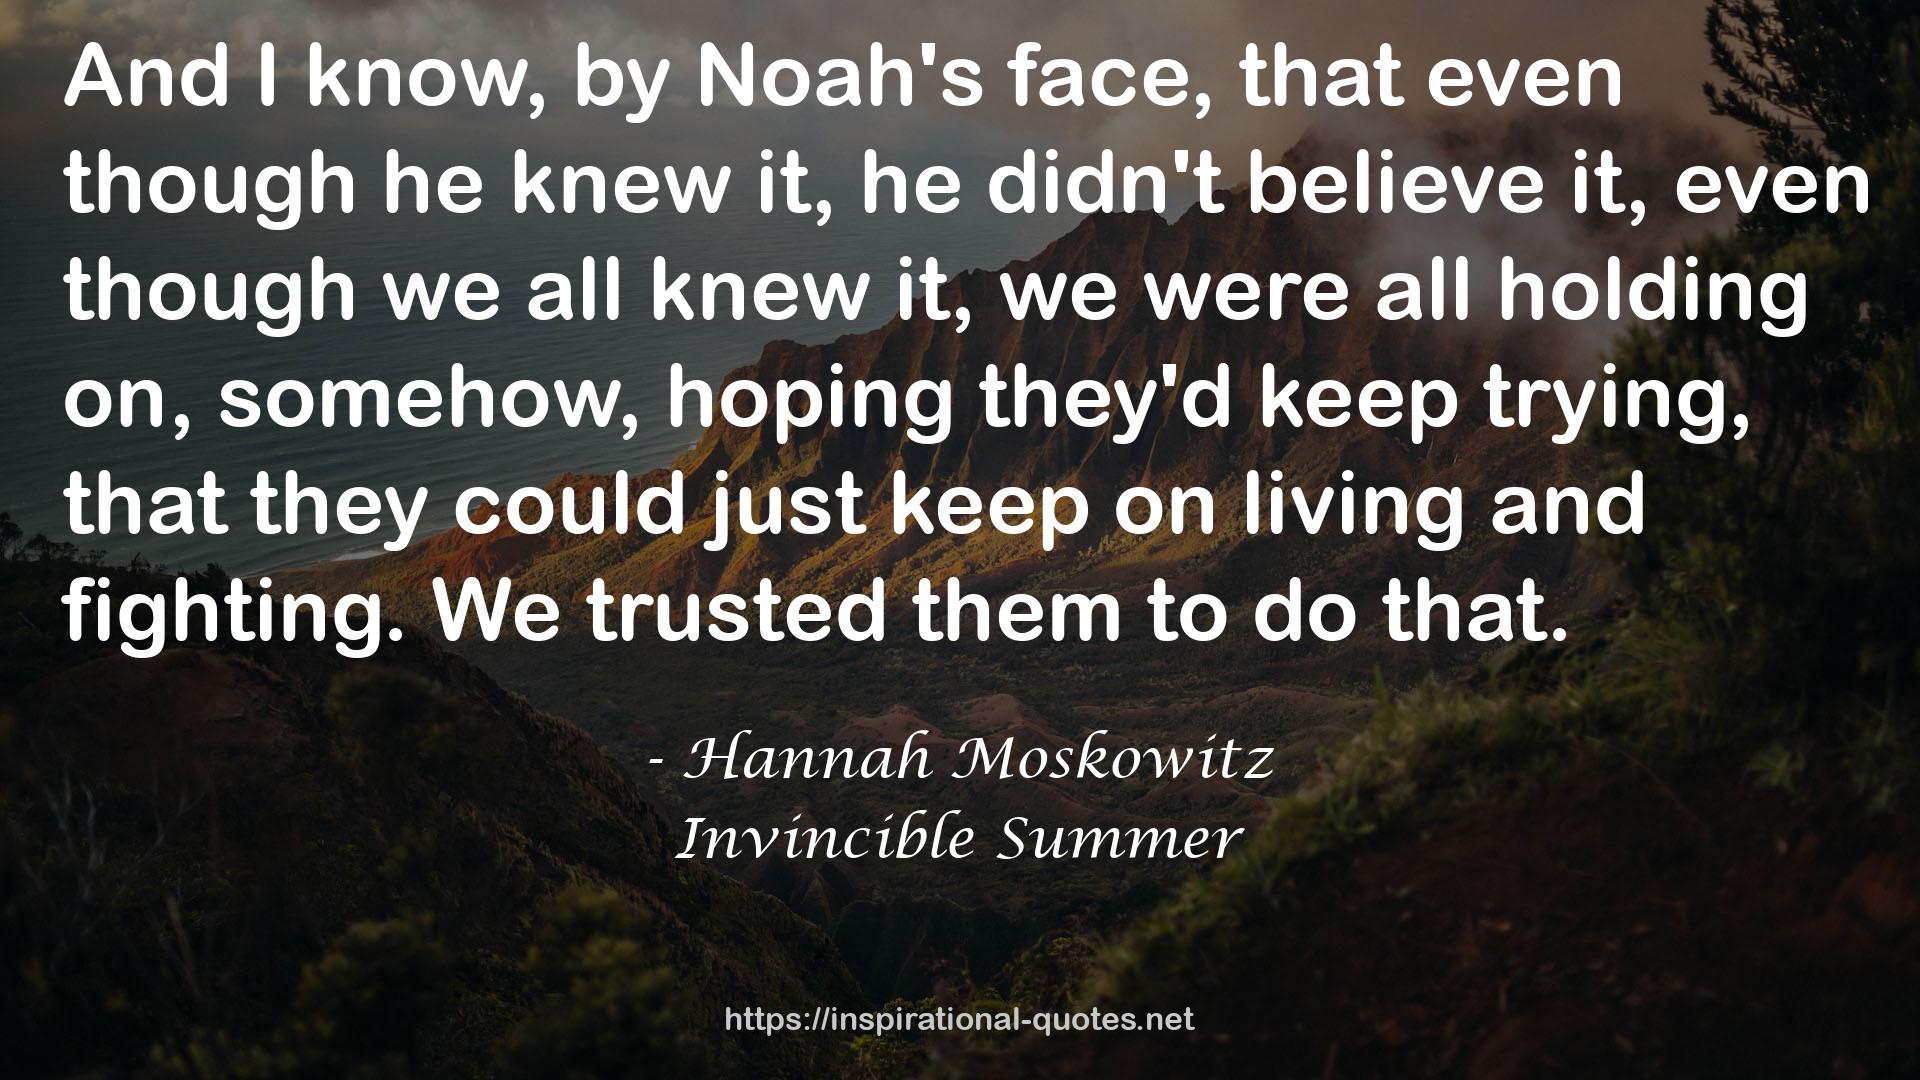 Invincible Summer QUOTES